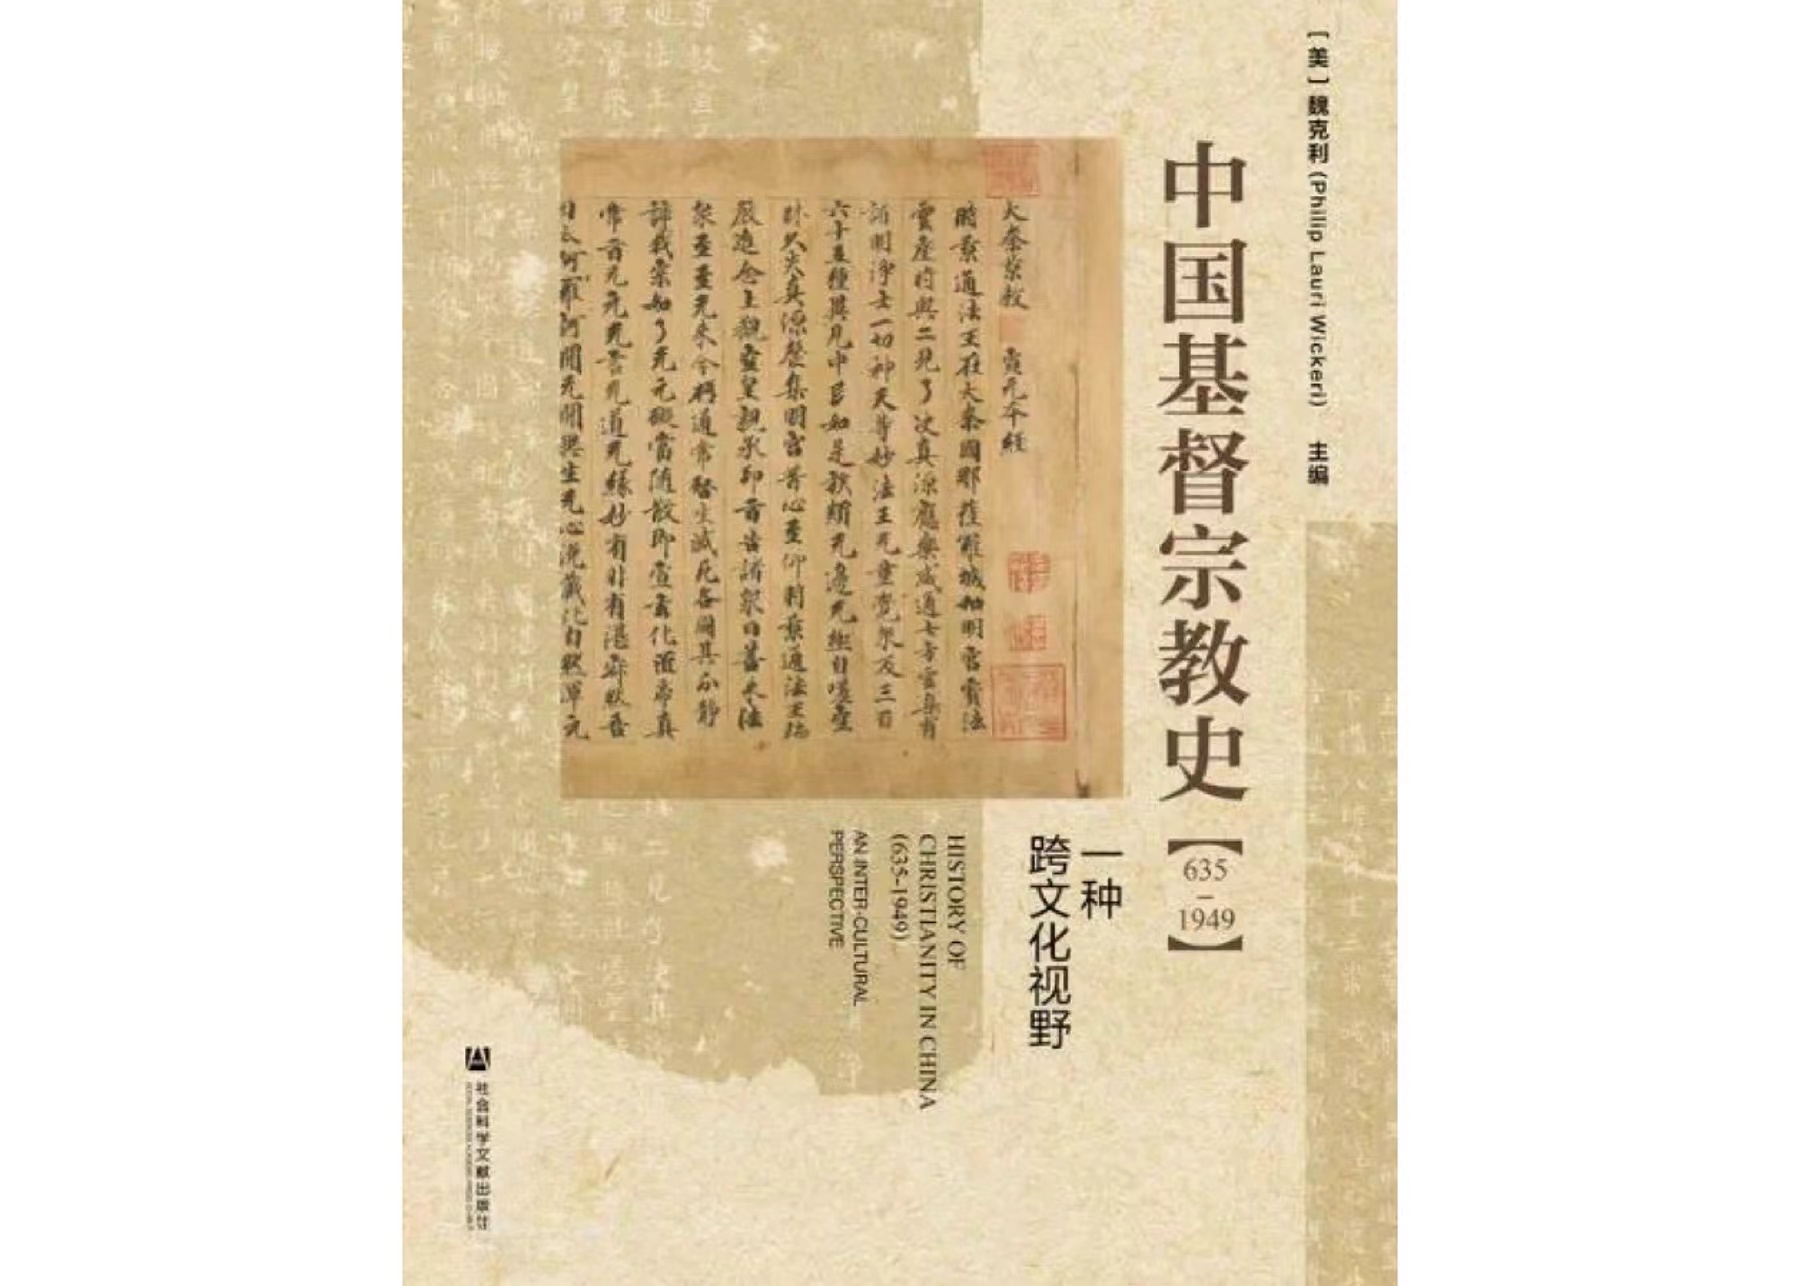 The cover of the book History of Christianity in China (635–1949)